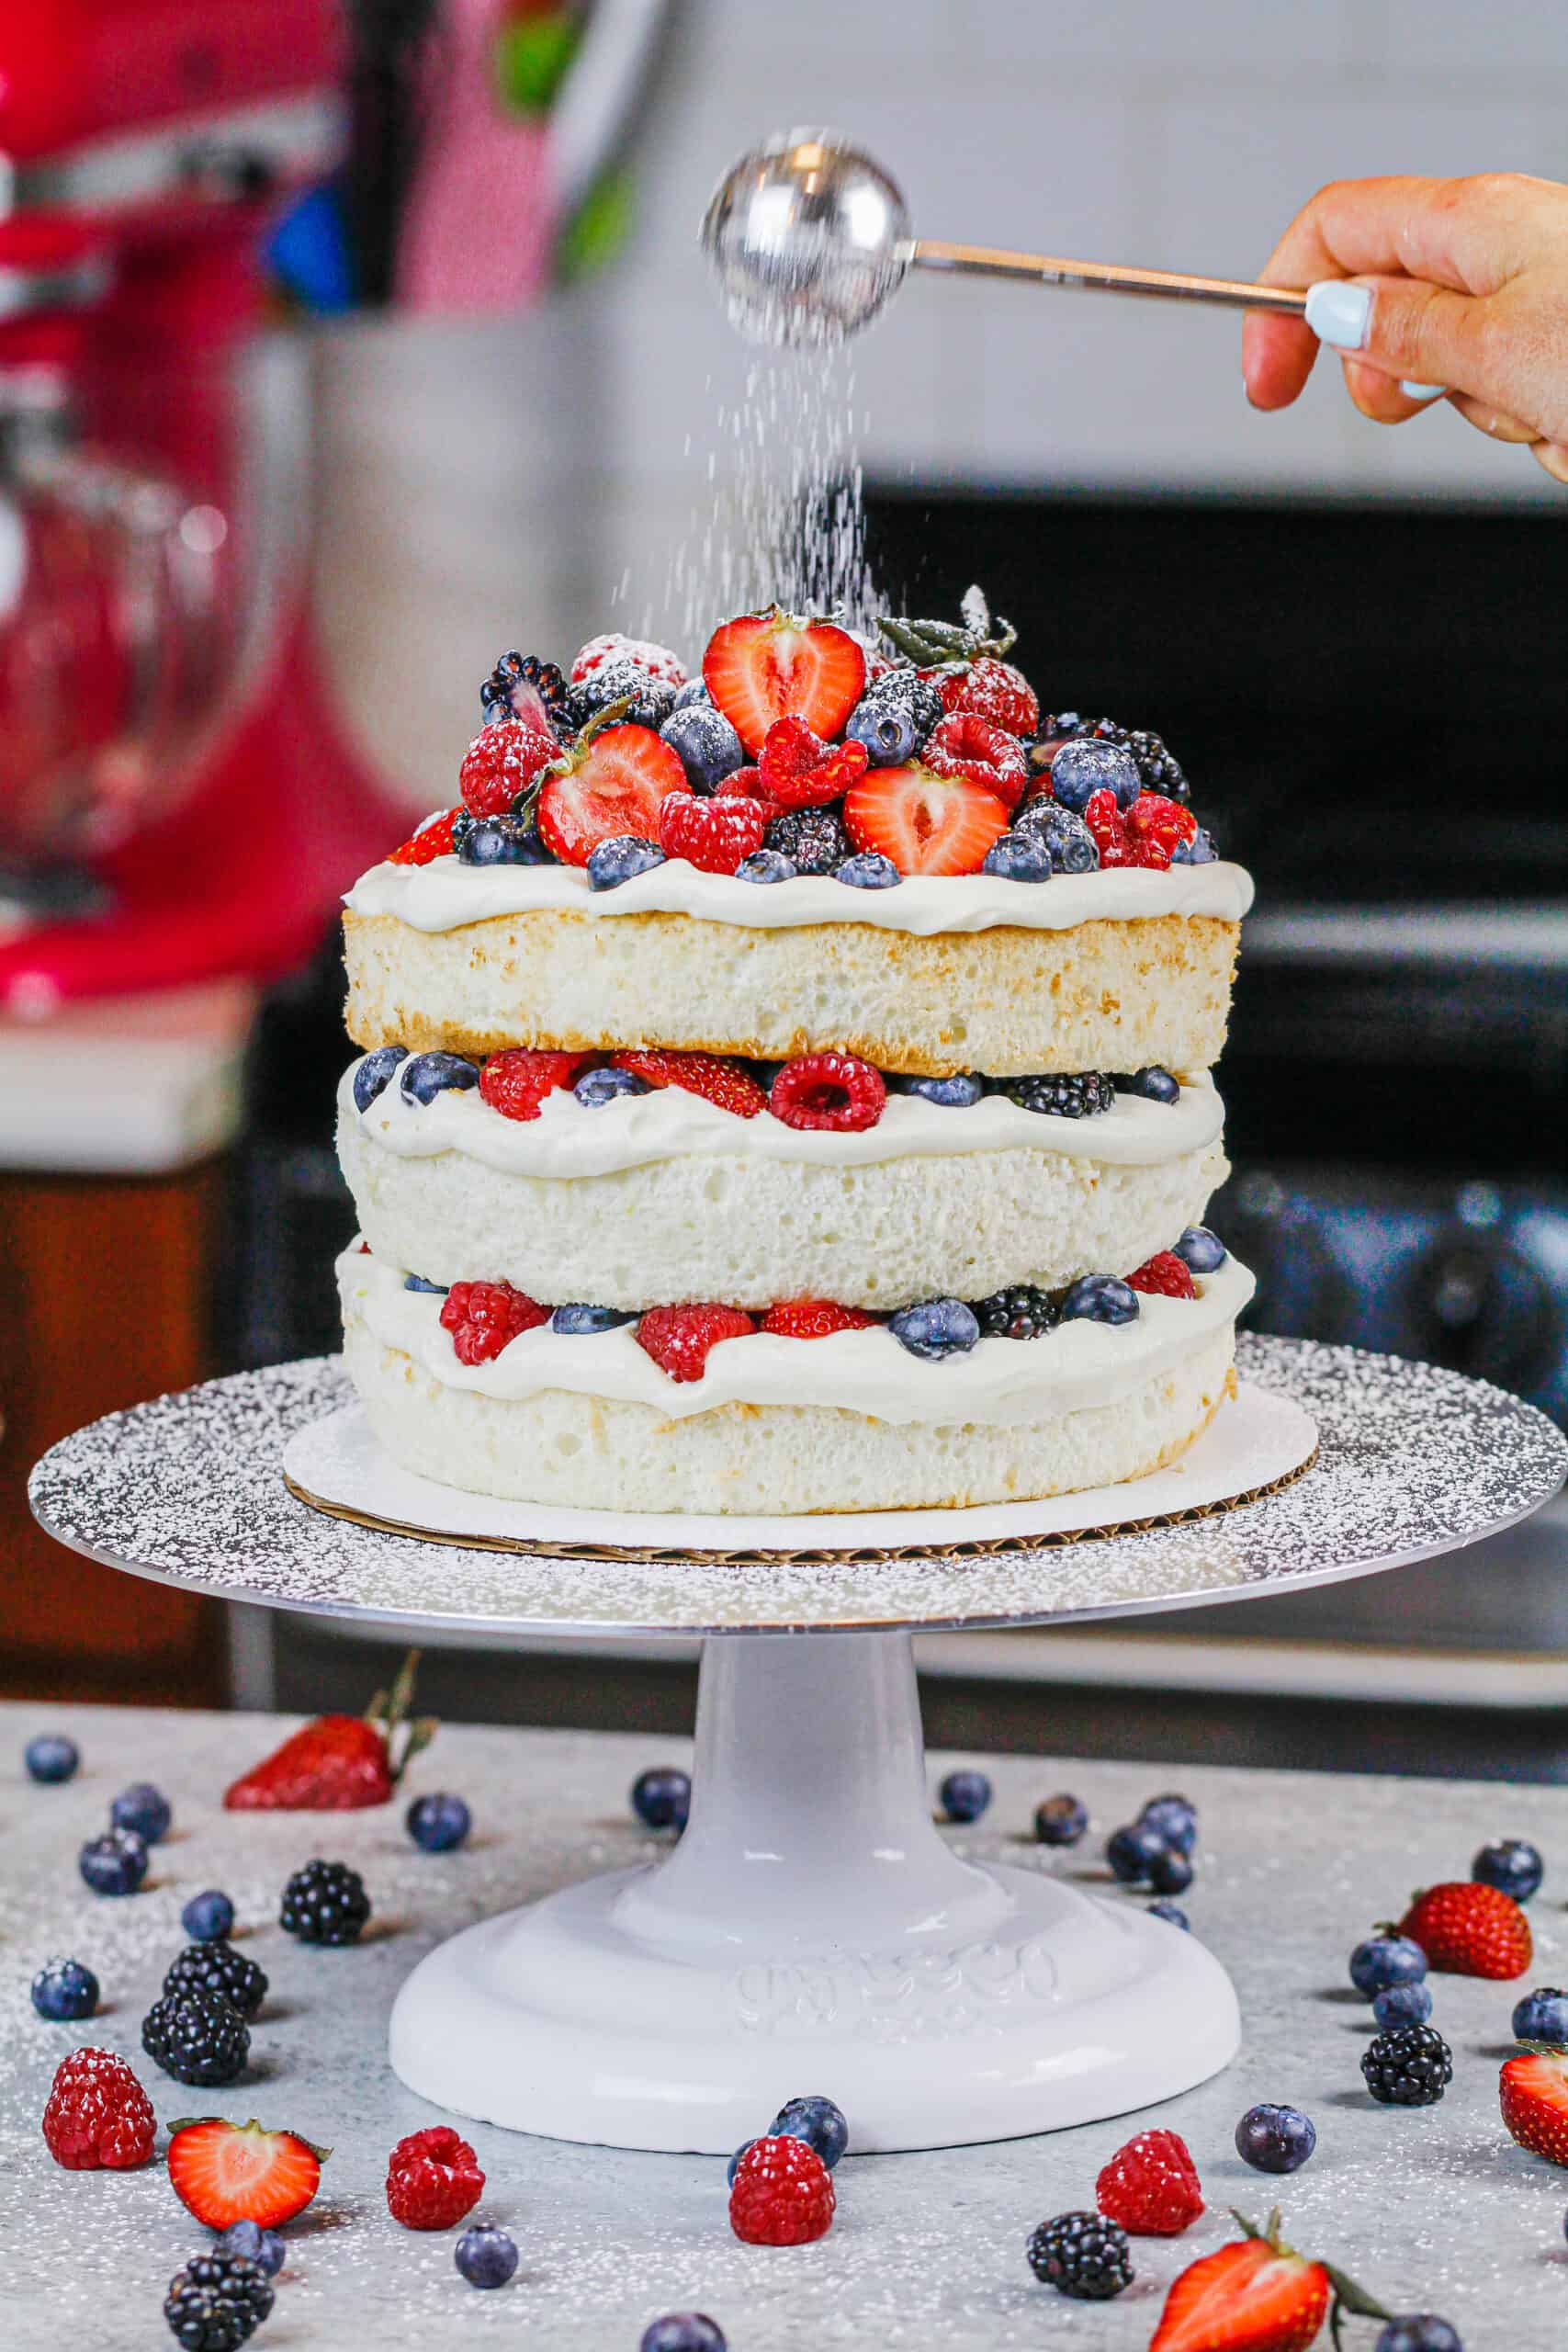 https://chelsweets.com/wp-content/uploads/2020/05/adding-powdered-sugar-to-top-of-cake-2-scaled.jpg